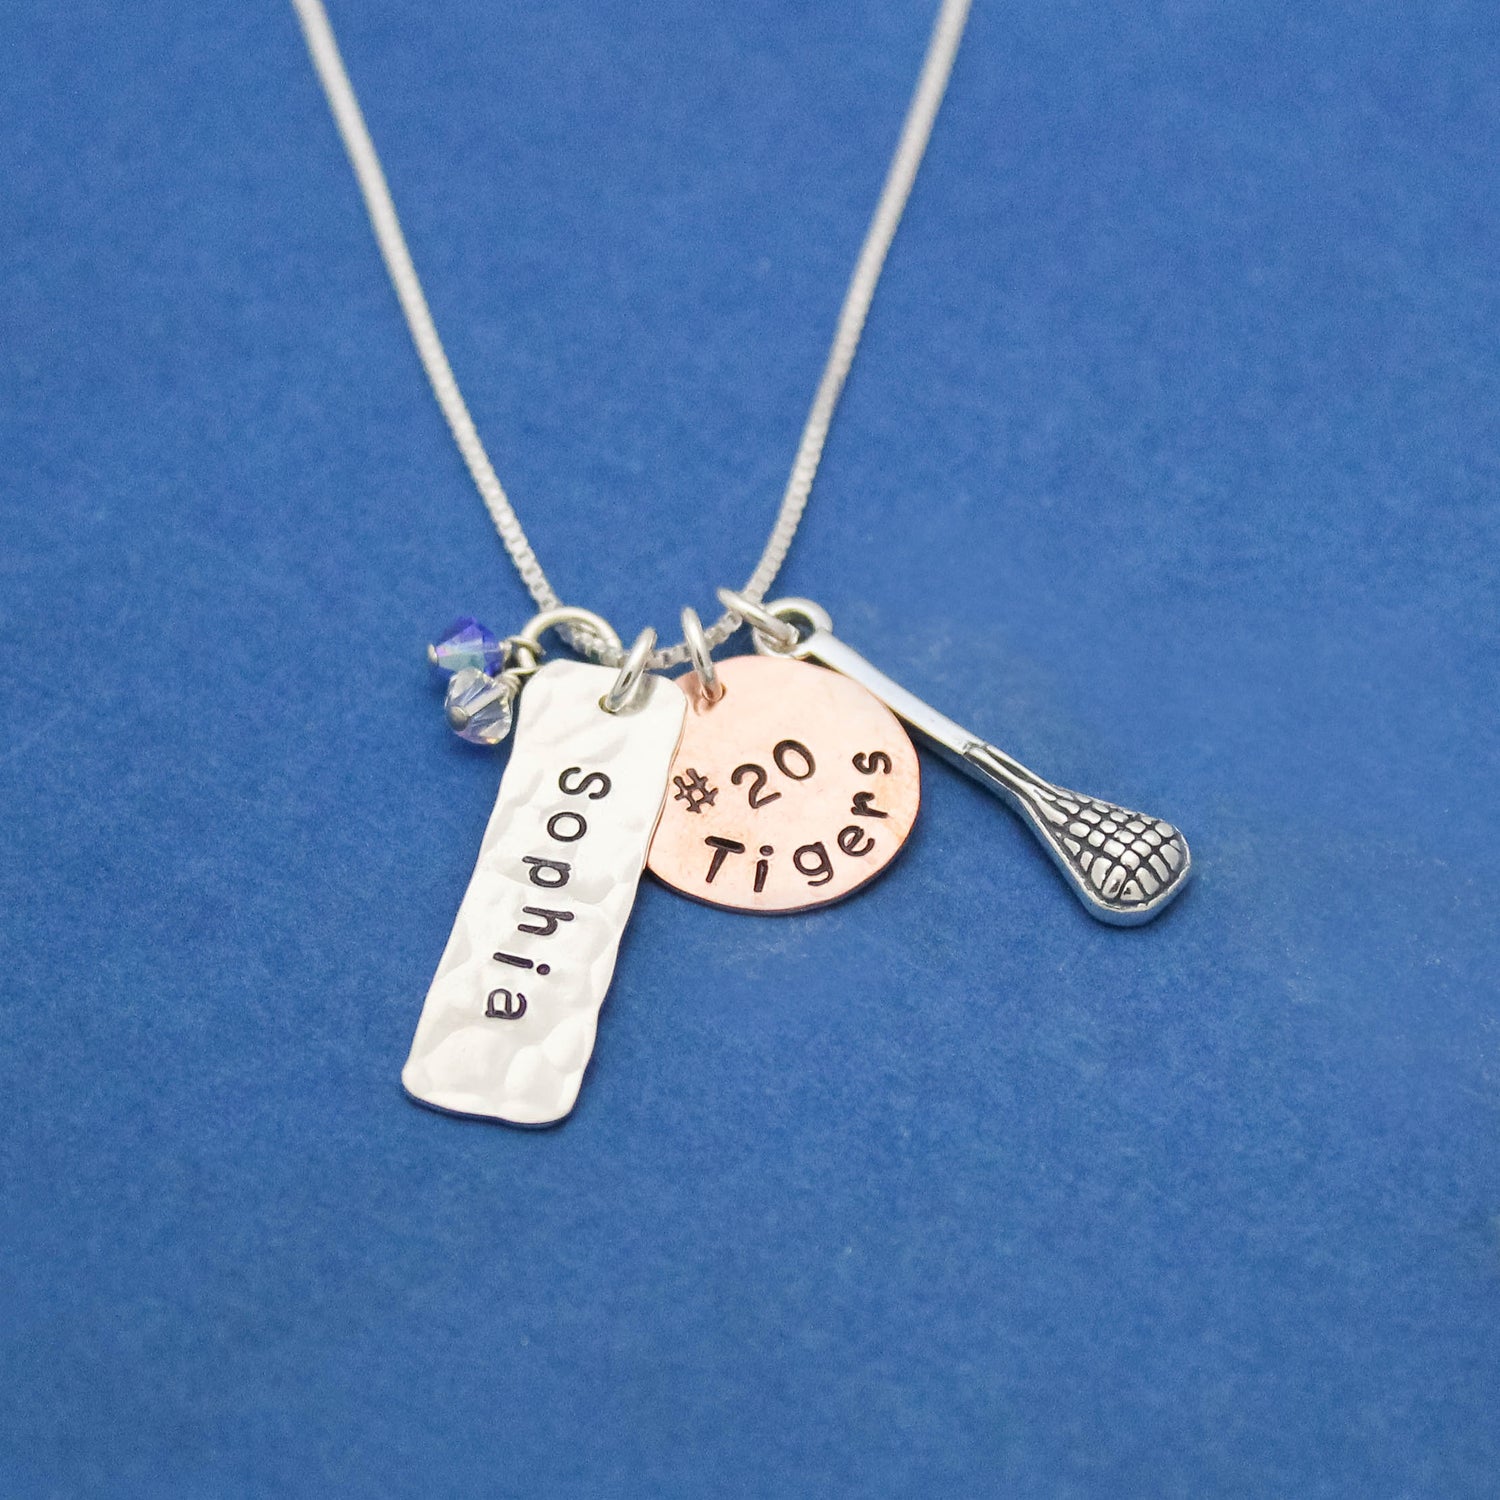 Team Necklace Volleyball, Field Hockey, Lacrosse, Softball Dog Tags Hand Stamped Personalized Hand Stamped Necklace